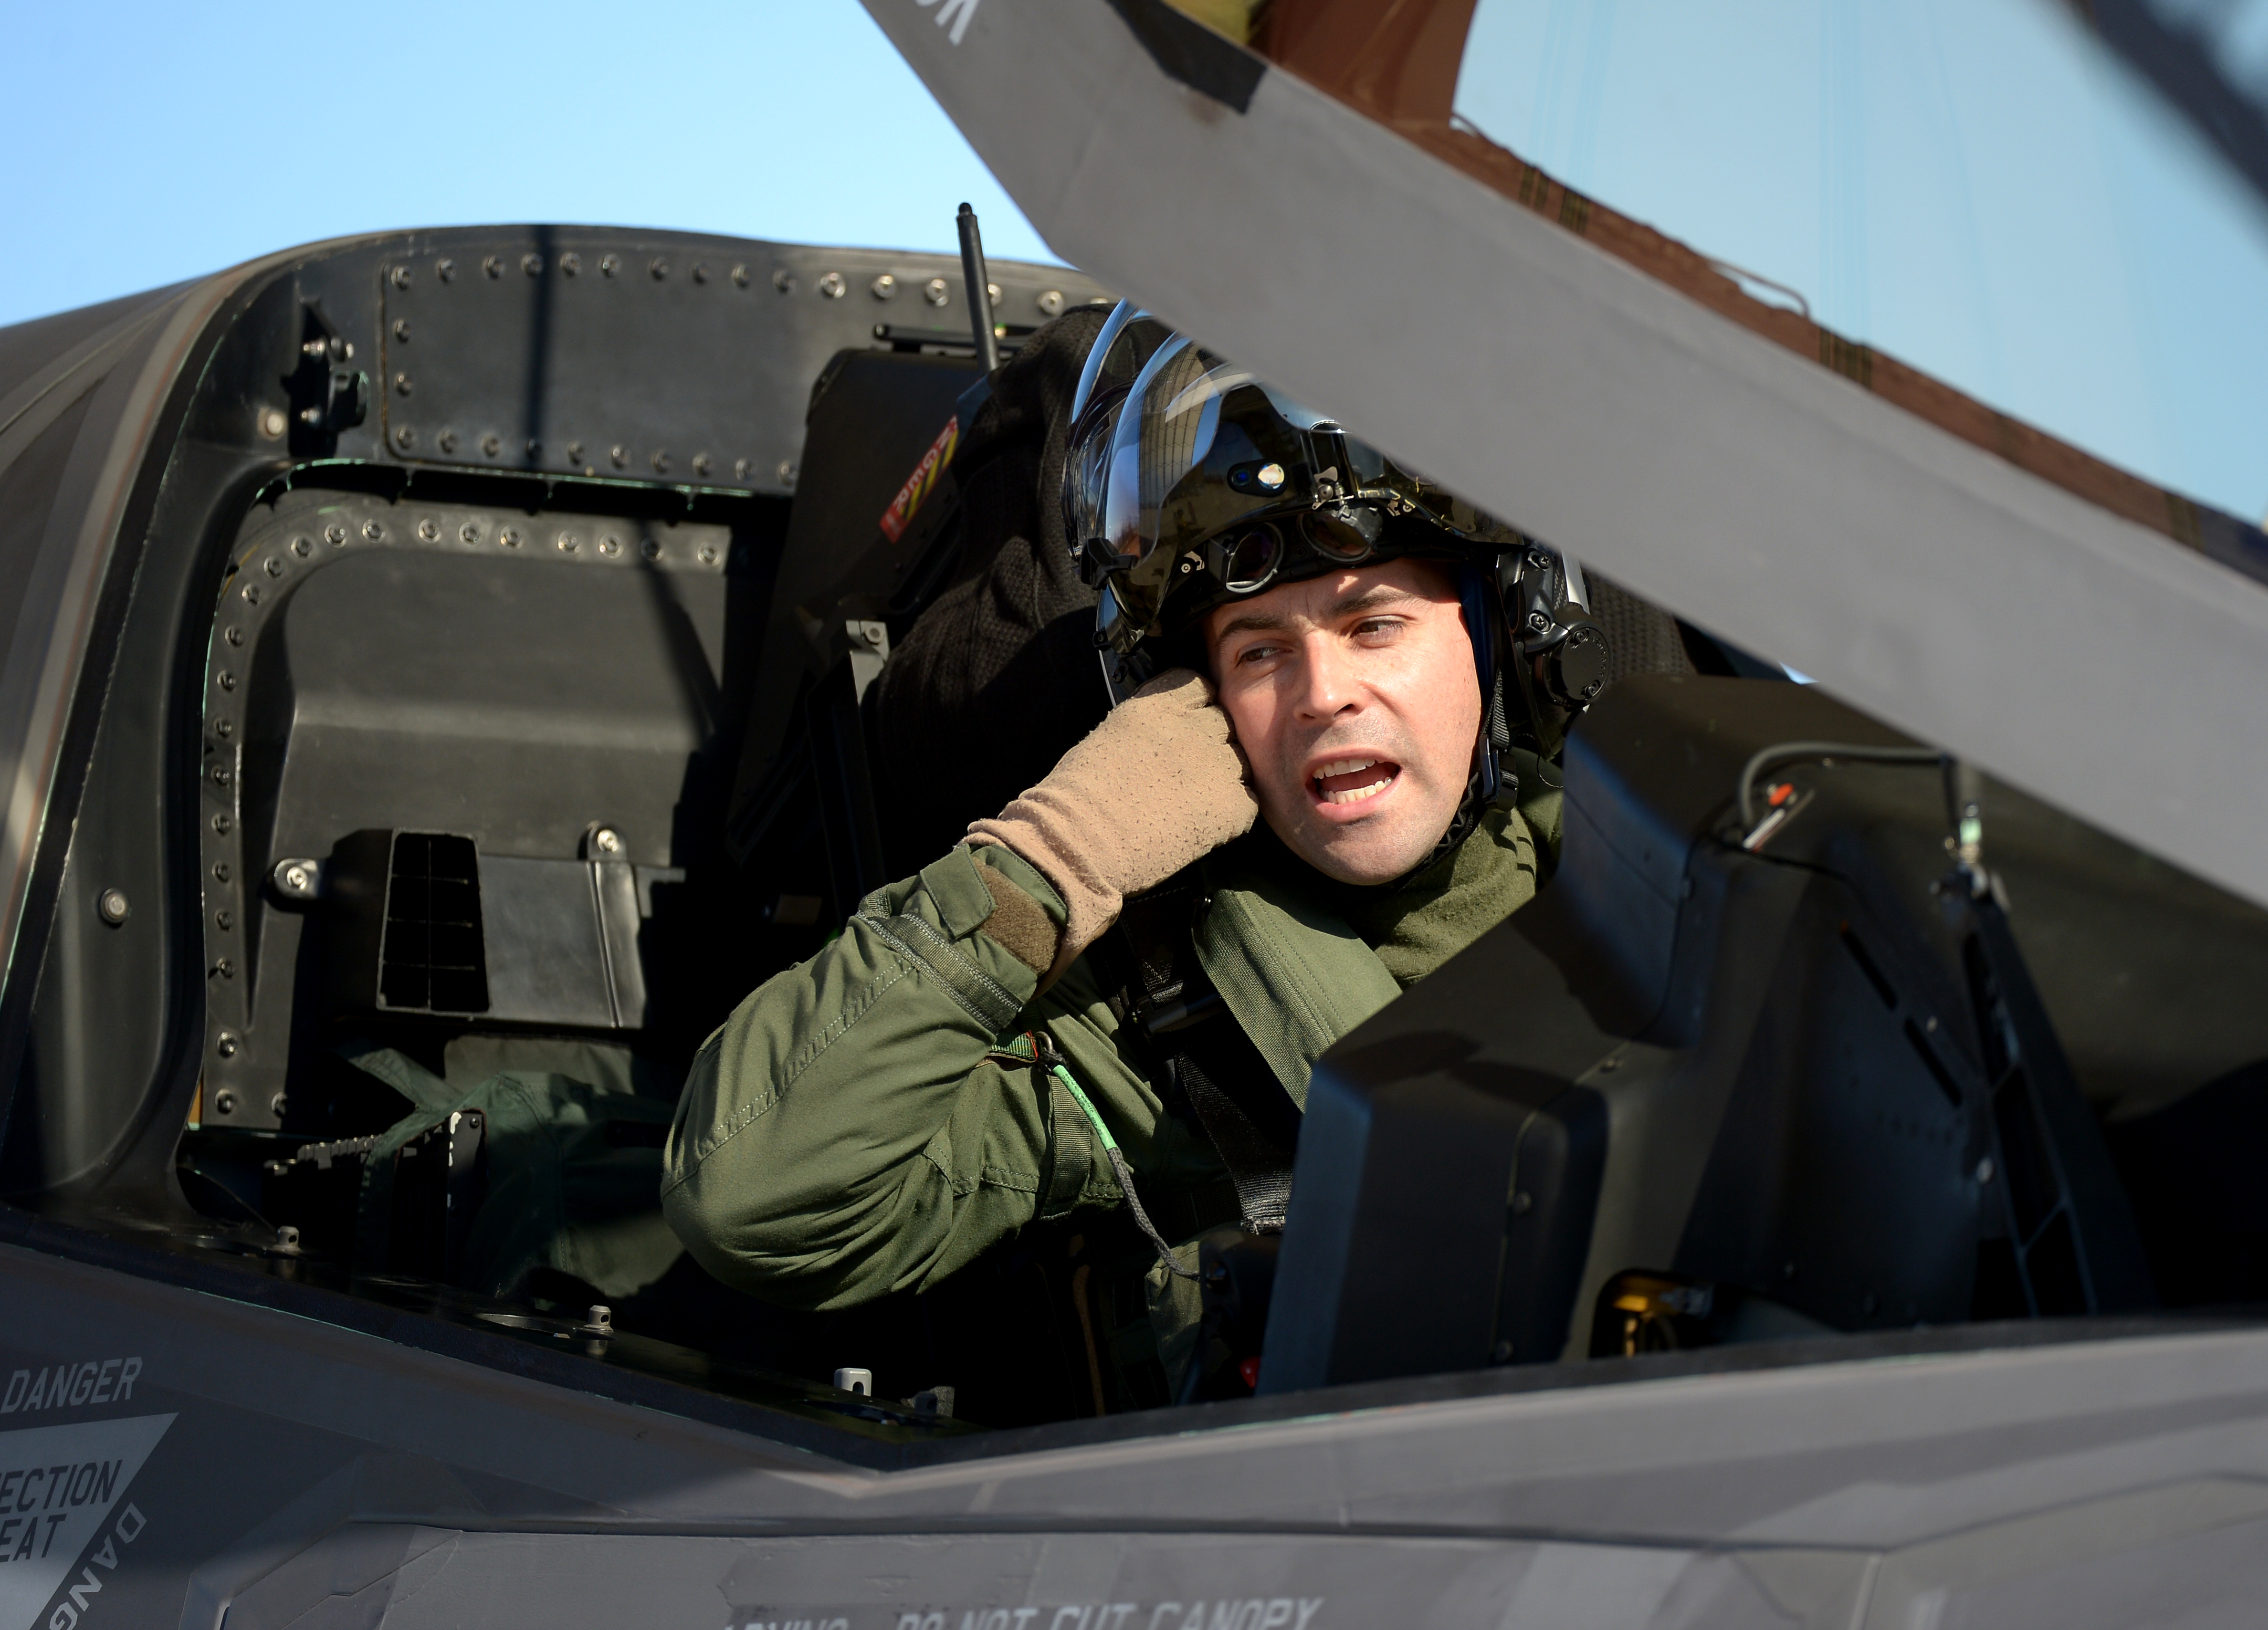 U.S. Marine Corps test pilot Maj. Richard Rusnok goes over his pre-flight check list in the cockpit of the  F-35B Lightning II aircraft BF-4p prior to a test flight at Naval Air Station Patuxent River on March 7, 2013 in Patuxent, MD (Jonathan Newton—The Washington Post/Getty Images)